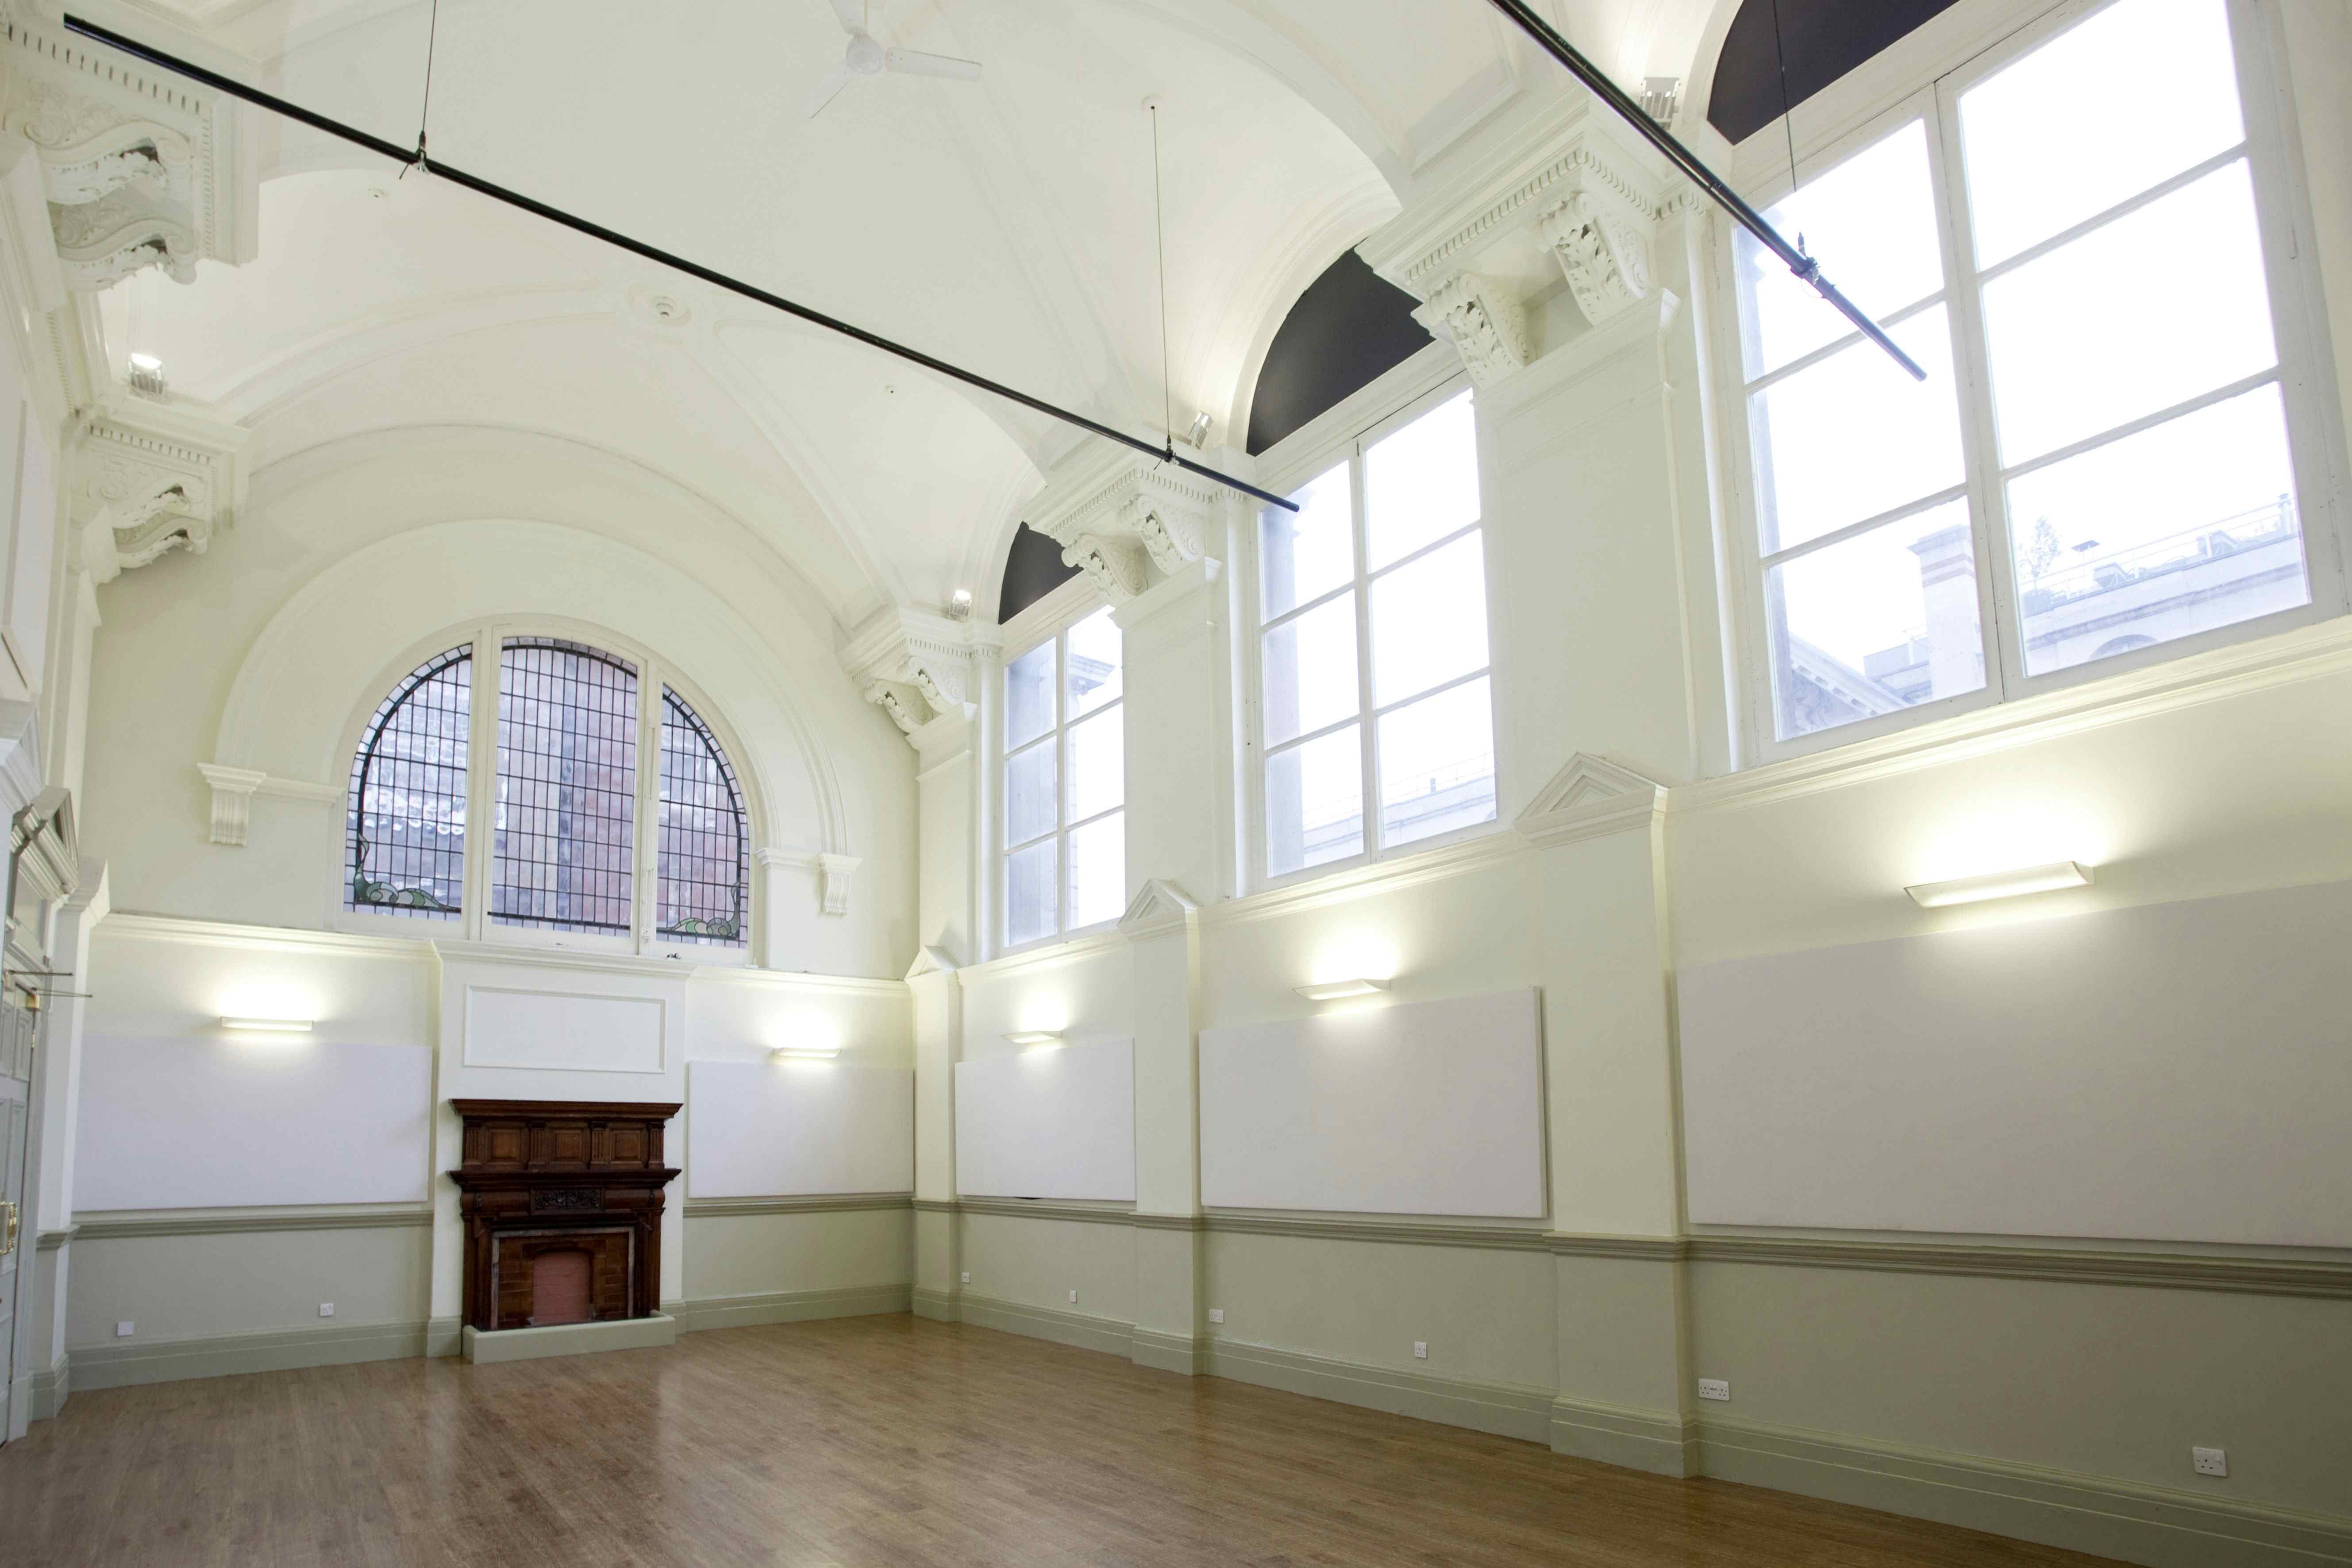 Large Committee Room, Shoreditch Town Hall